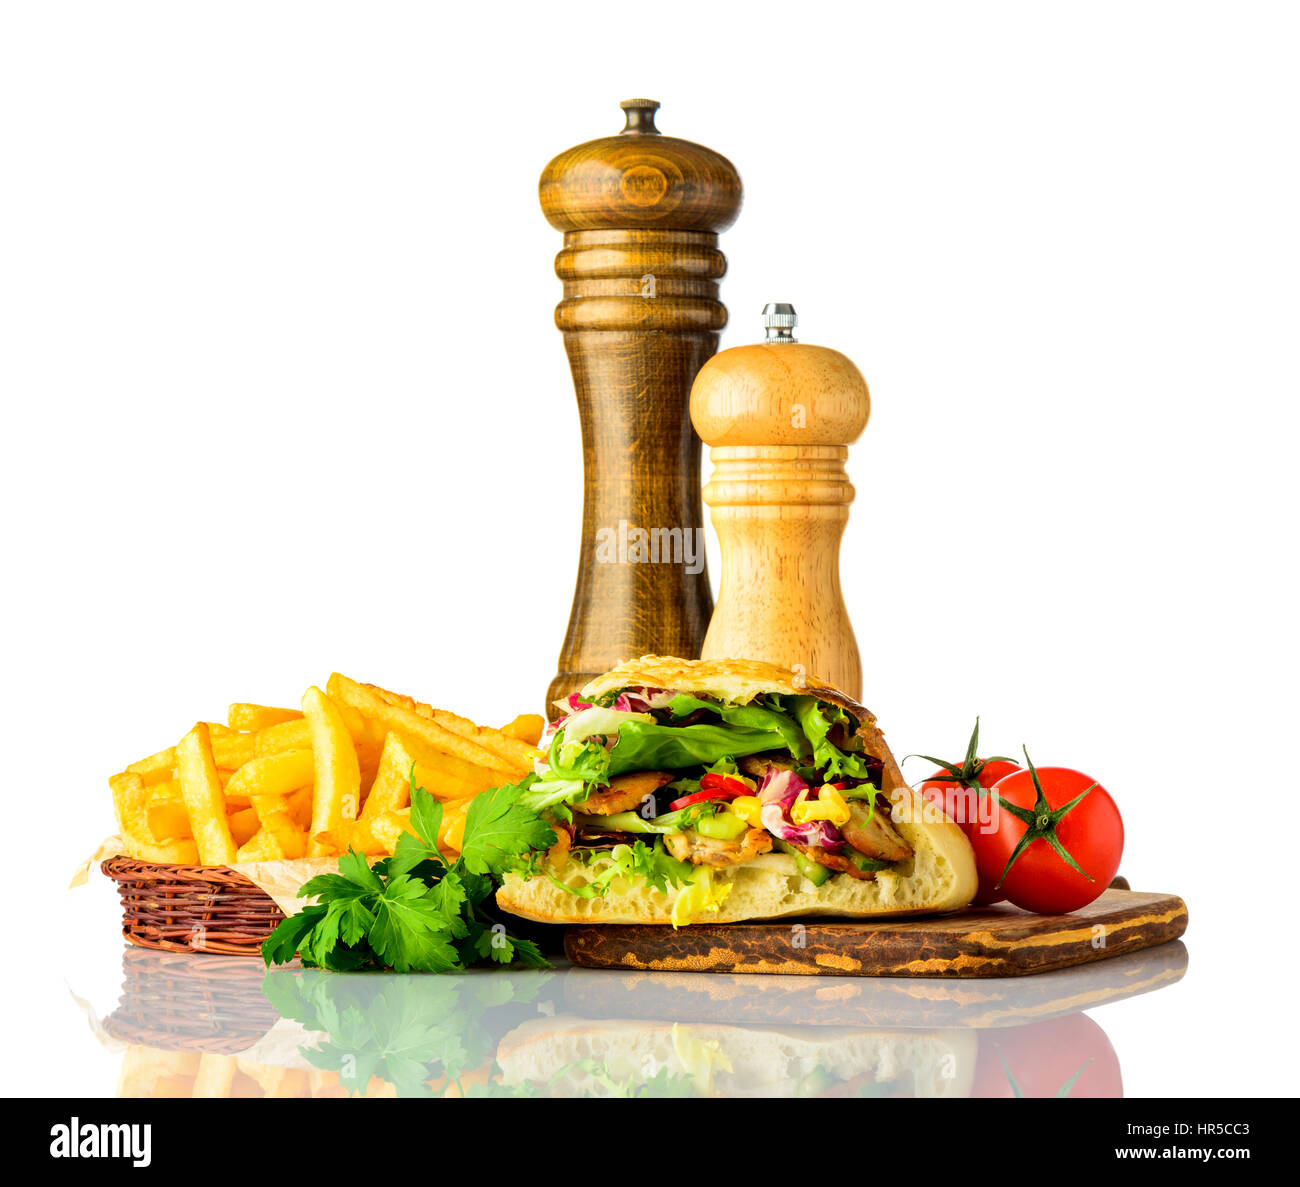 French Fries with Doner Kebap Sandwich and Fresh Vegetables Isolated on White Background Stock Photo